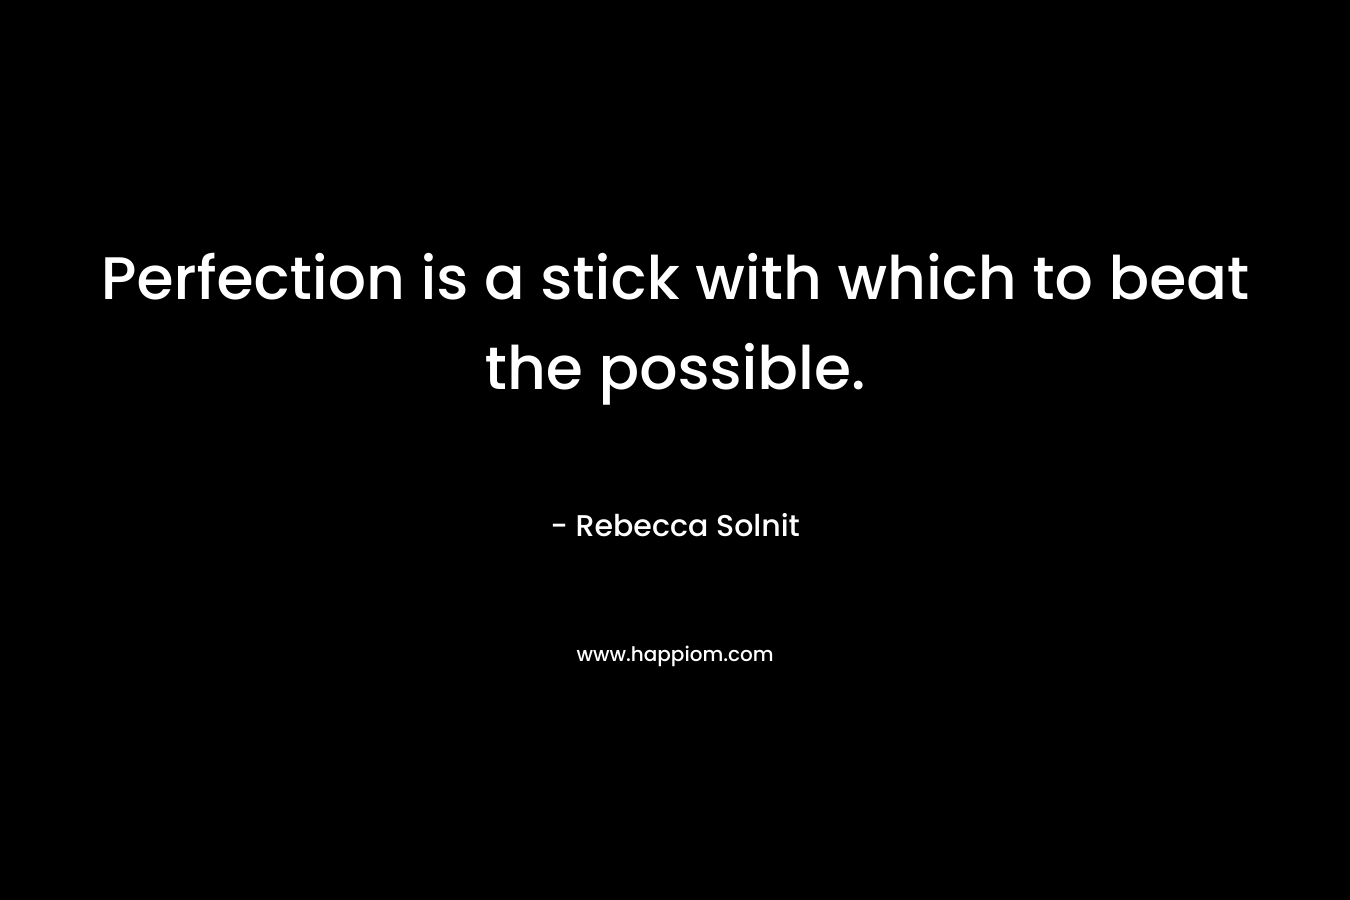 Perfection is a stick with which to beat the possible. – Rebecca Solnit